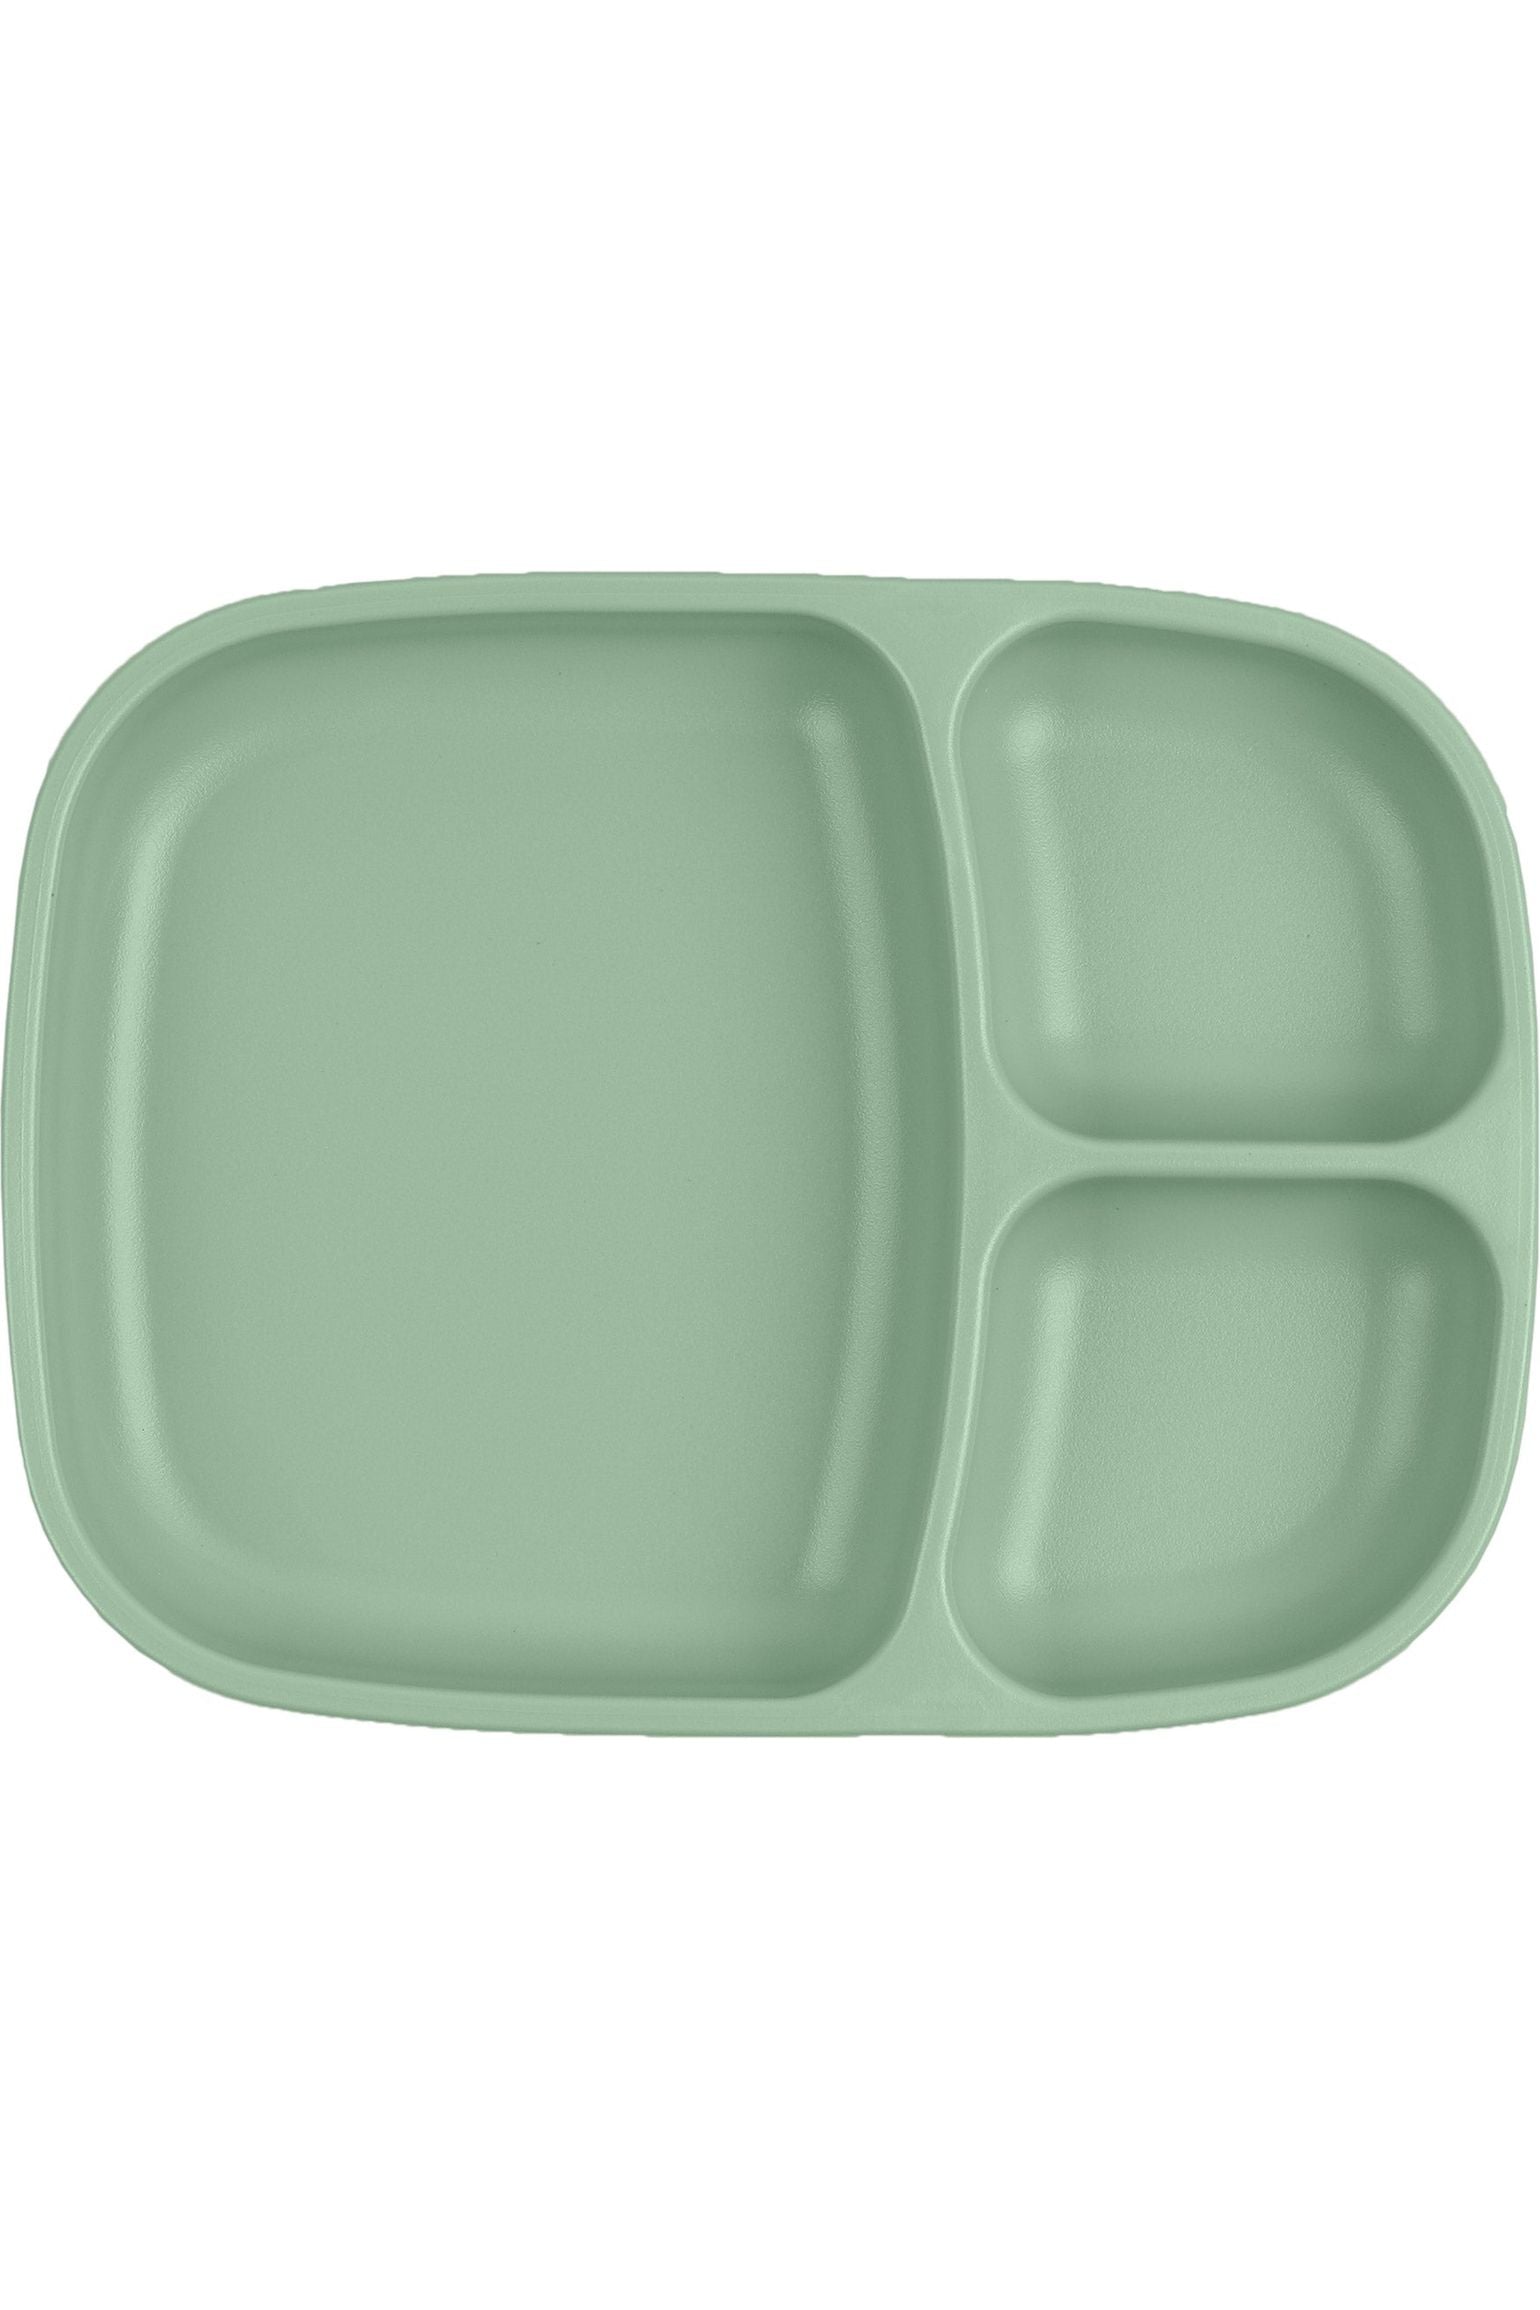 Re-Play Divided Tray - Sage